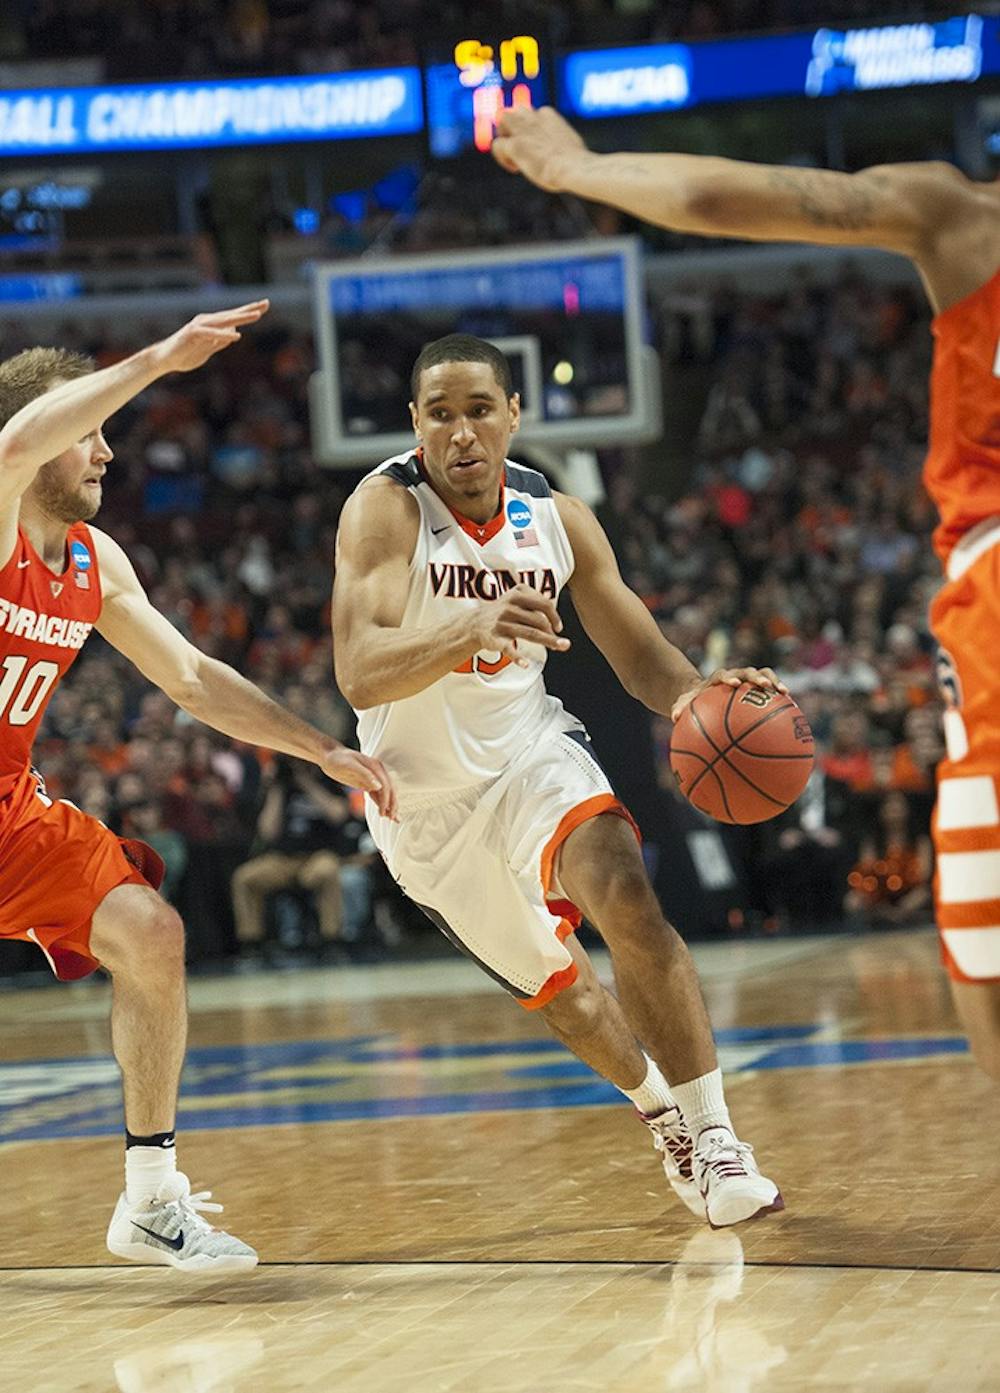 <p>Malcolm&nbsp;Brogdon garnered first-team All-American honors for a campaign in which he scored 18.2 points per game. Additionally, he was the ACC Player of the Year and Defensive Player of the Year.</p>